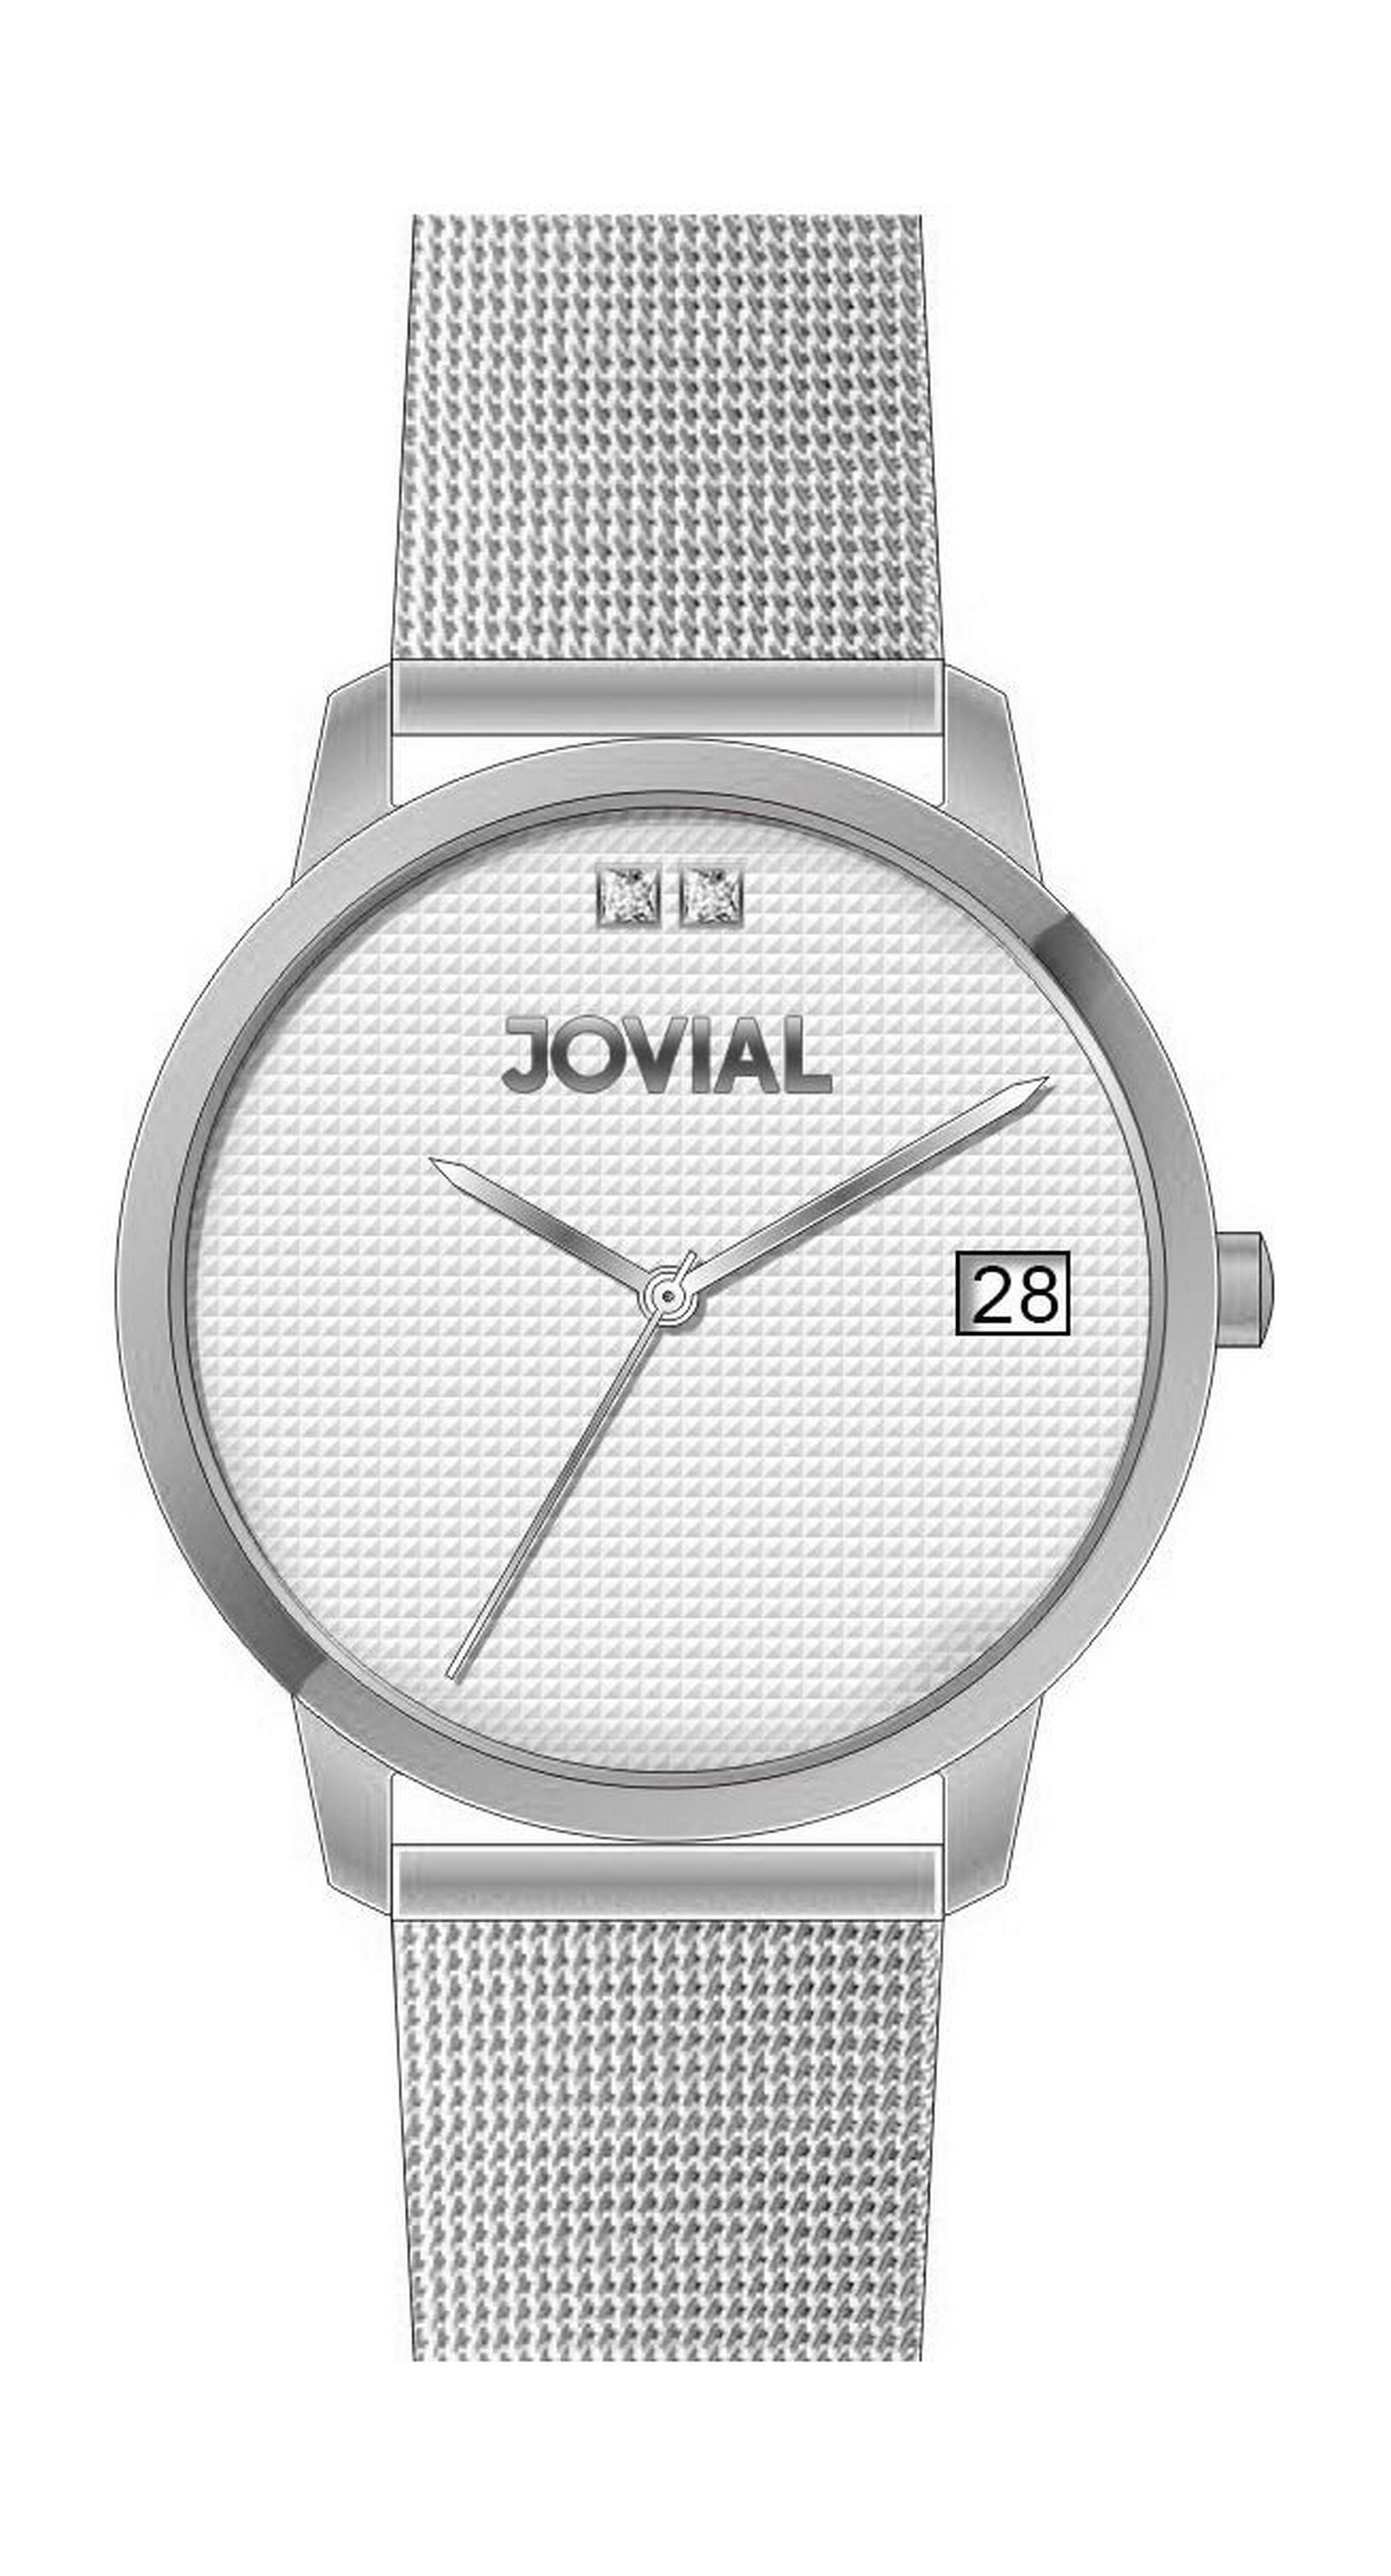 Jovial GS2011-01 Casual Analog Gents Watch - Metal Strap - Silver